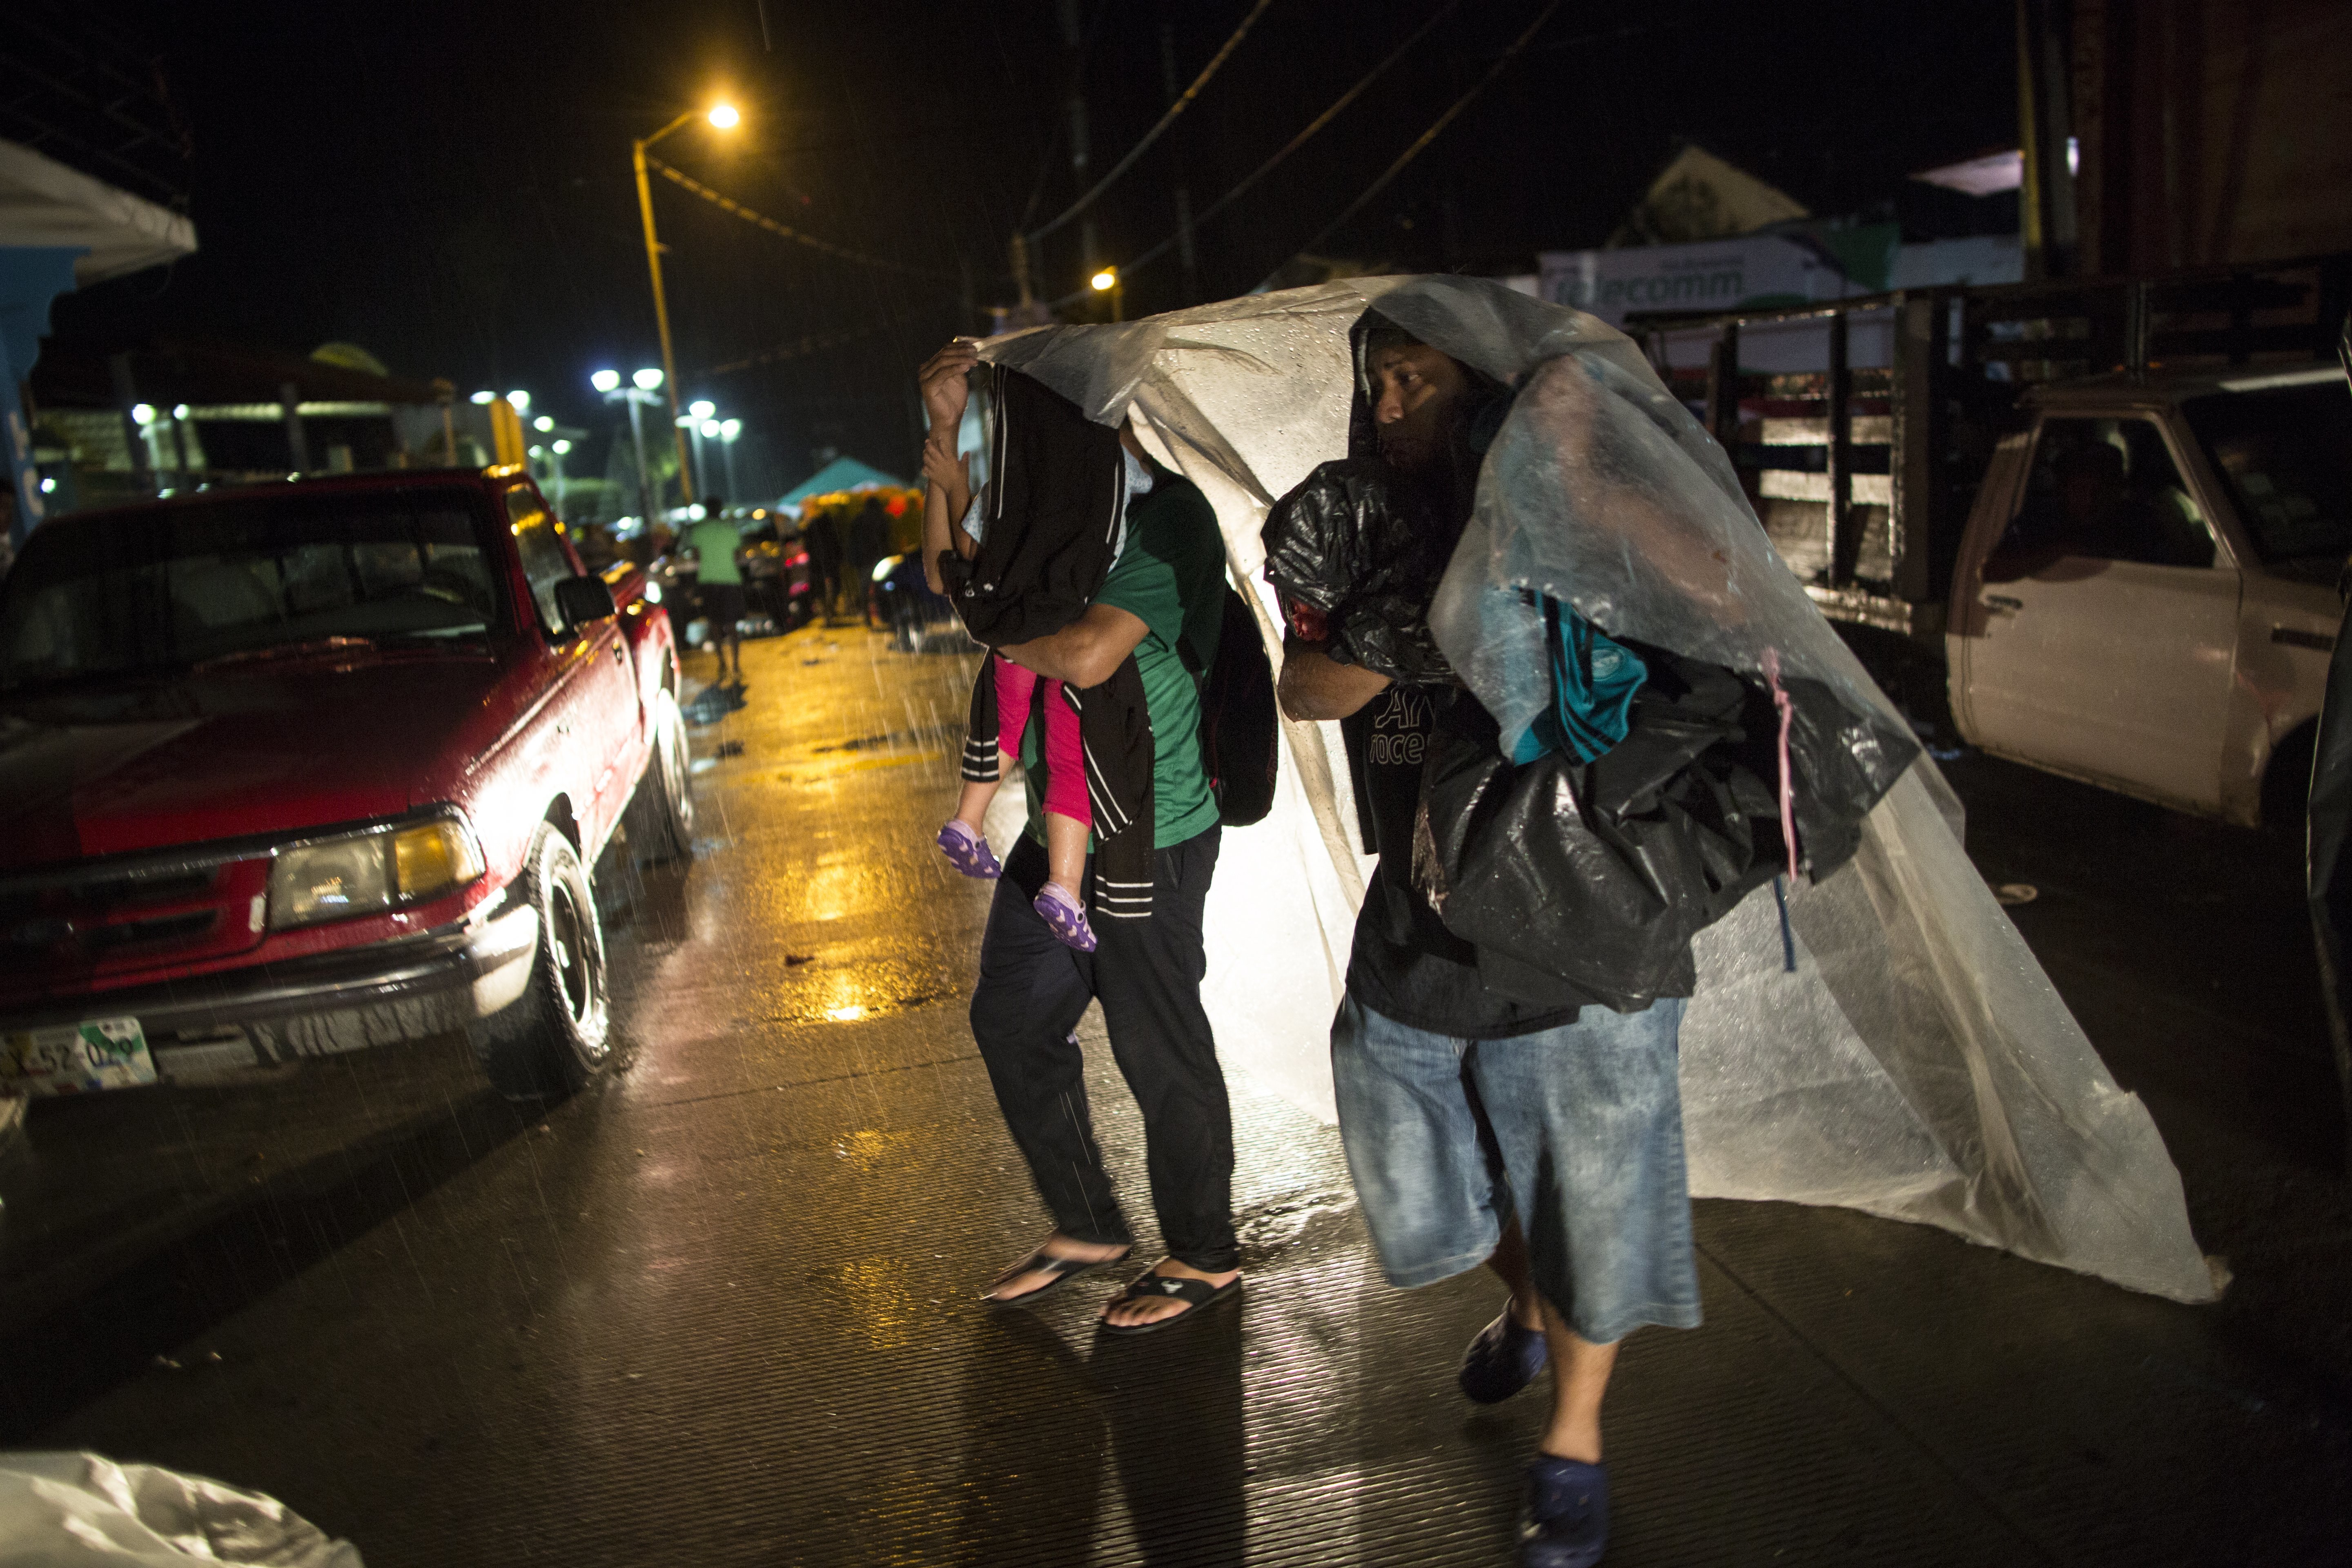 Central American migrants take cover from a heavy rain in Mapastepec, Mexico, Wednesday, Oct. 24, 2018. Thousands of Central American migrants renewed their hoped-for march to the United States on Wednesday, setting out before dawn with more than 1,000 miles still before them. (AP Photo/Rodrigo Abd)